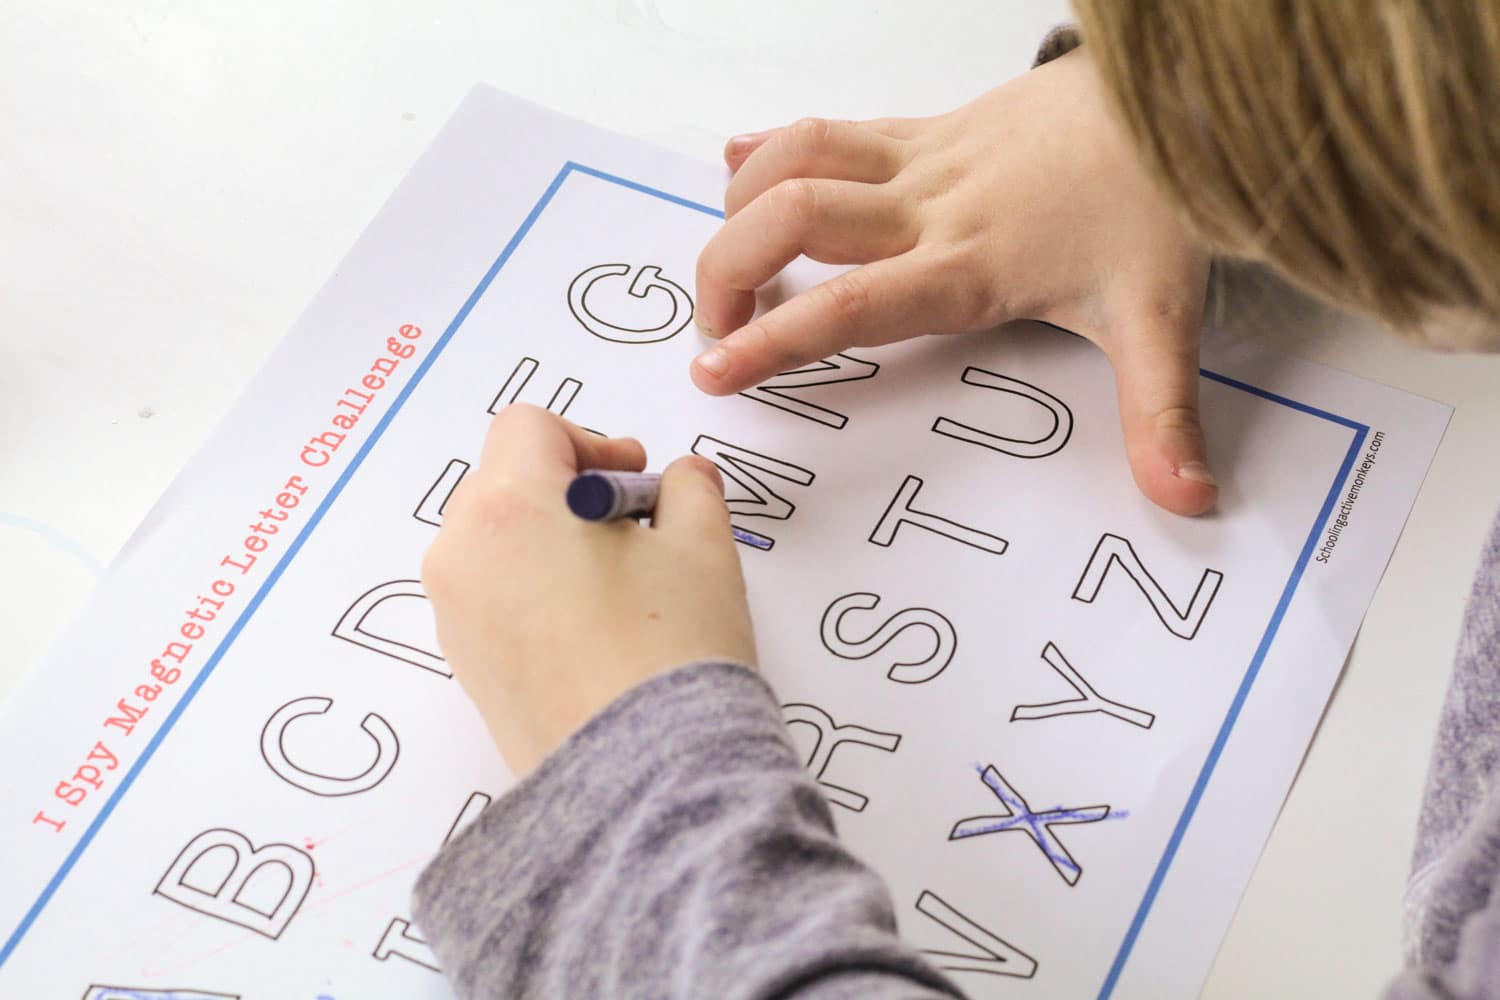 Make learning and recognizing letters fun with this seek and find magnetic letter matching game and printable! Just print and you're ready to play! #letteractivities #kindergarten #literacyactvities #freeprintables